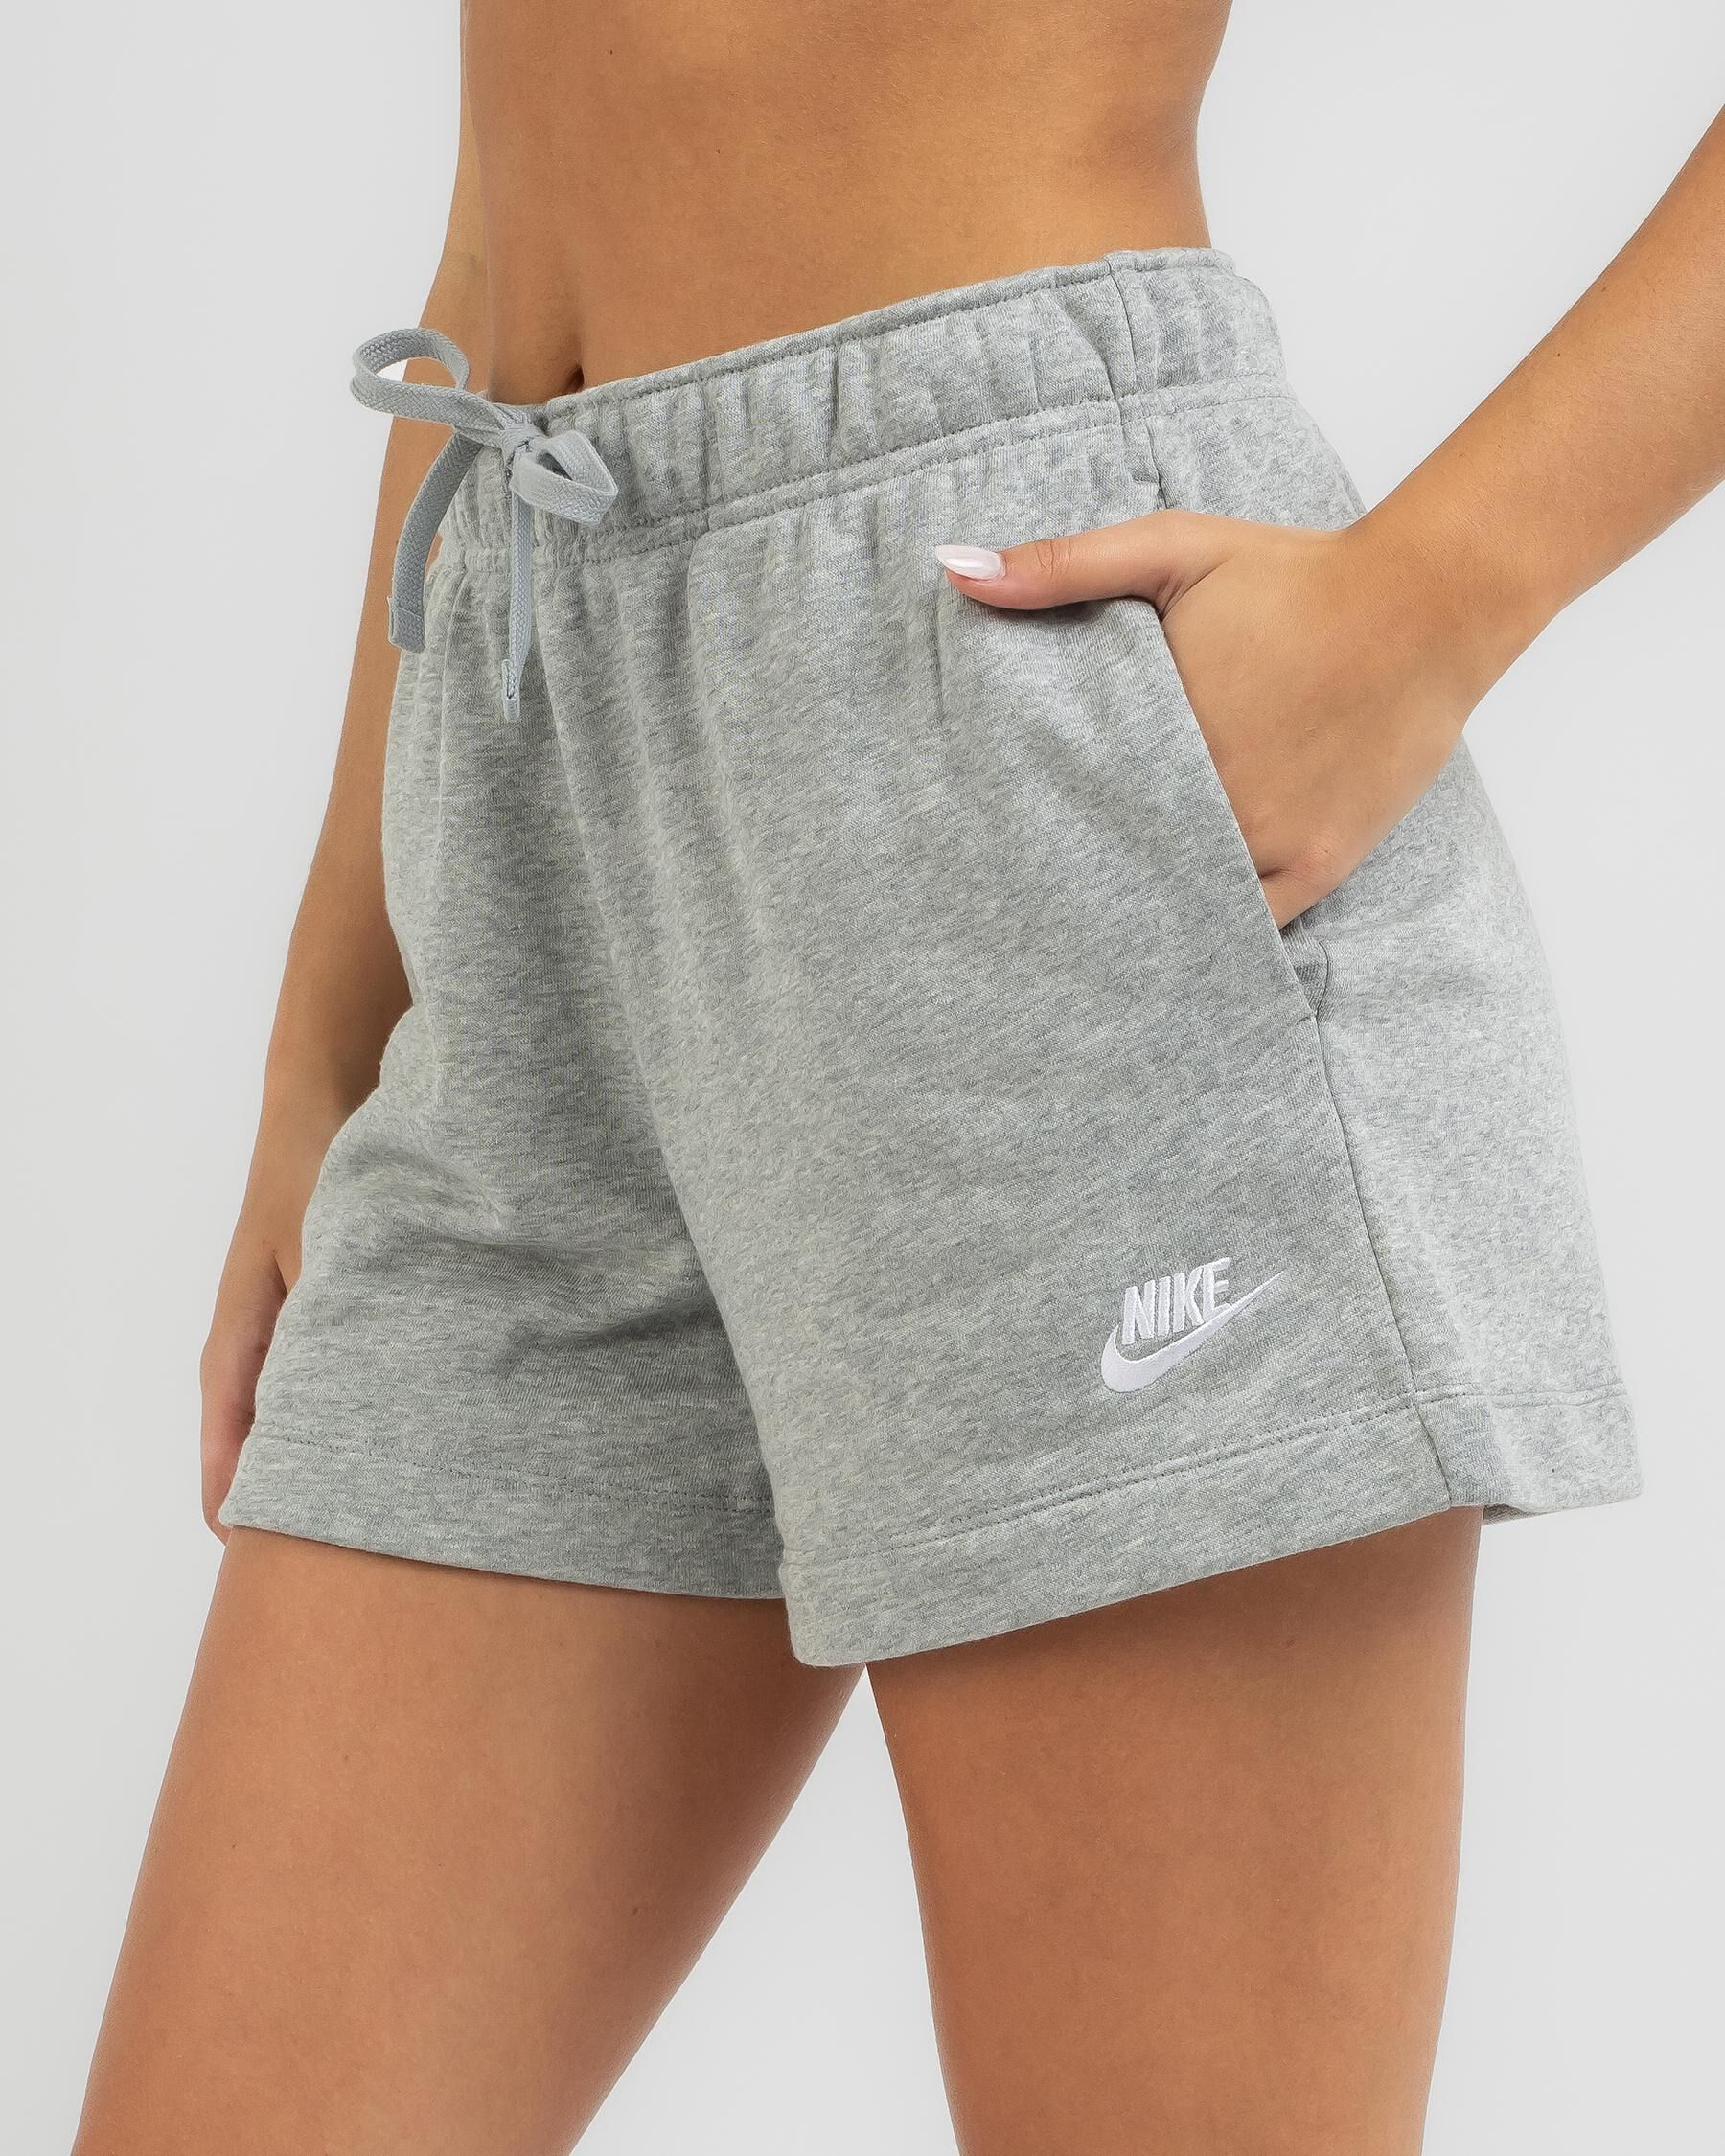 How to Wear Grey Sweat Shorts: Top 13 Cozy Outfit Ideas for Women